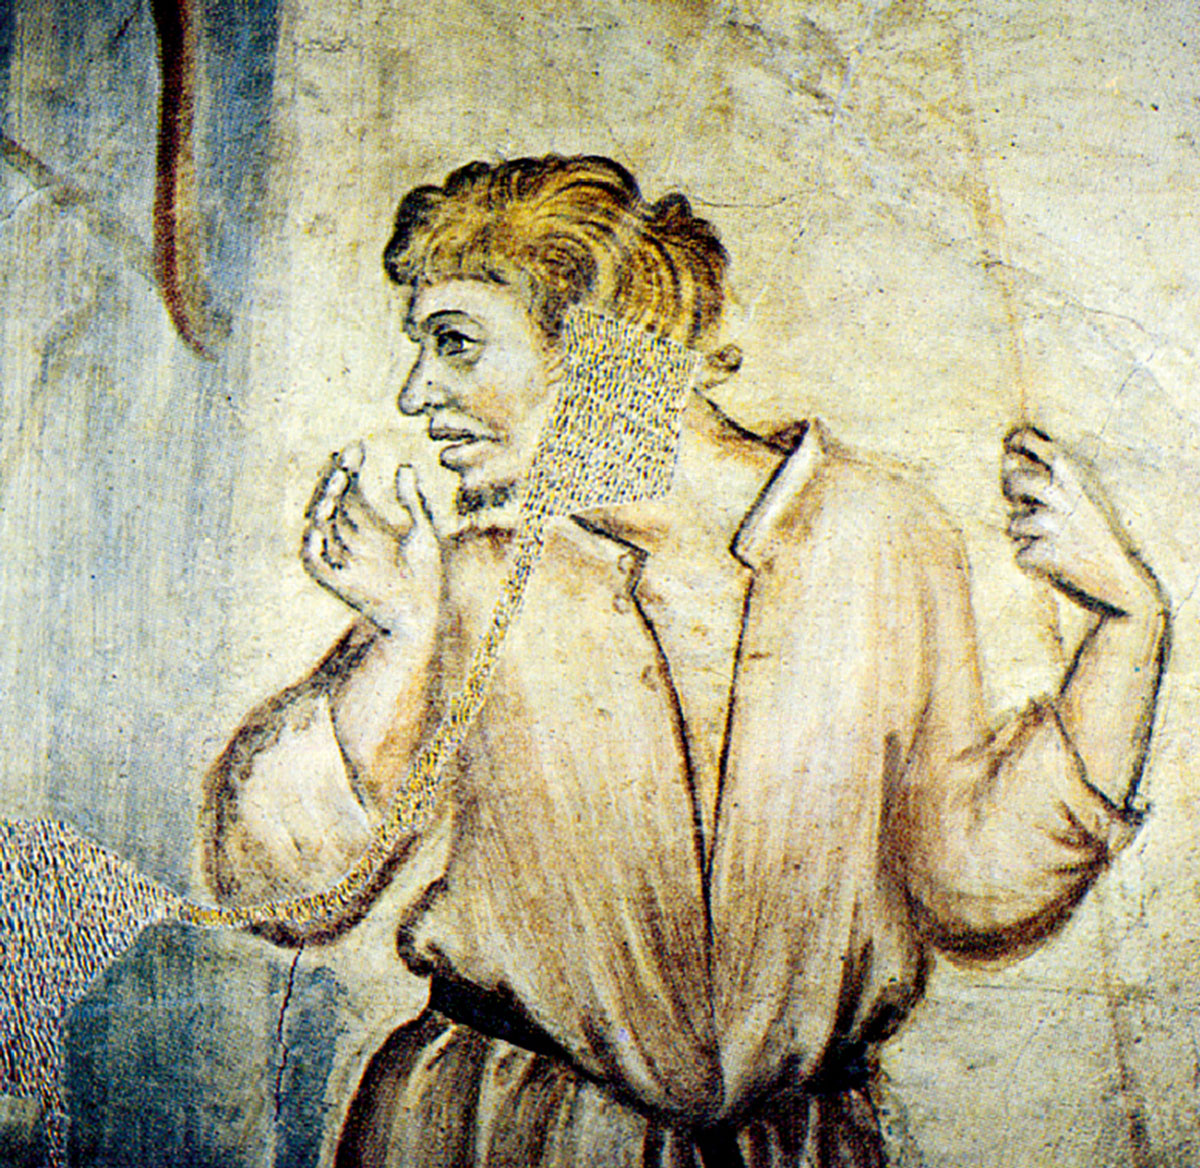 A detail of an early fourteenth-century fresco in the Velluti Chapel of the Basilica of Santa Croce, Florence, where chromatic abstraction was used to fill a lacuna.